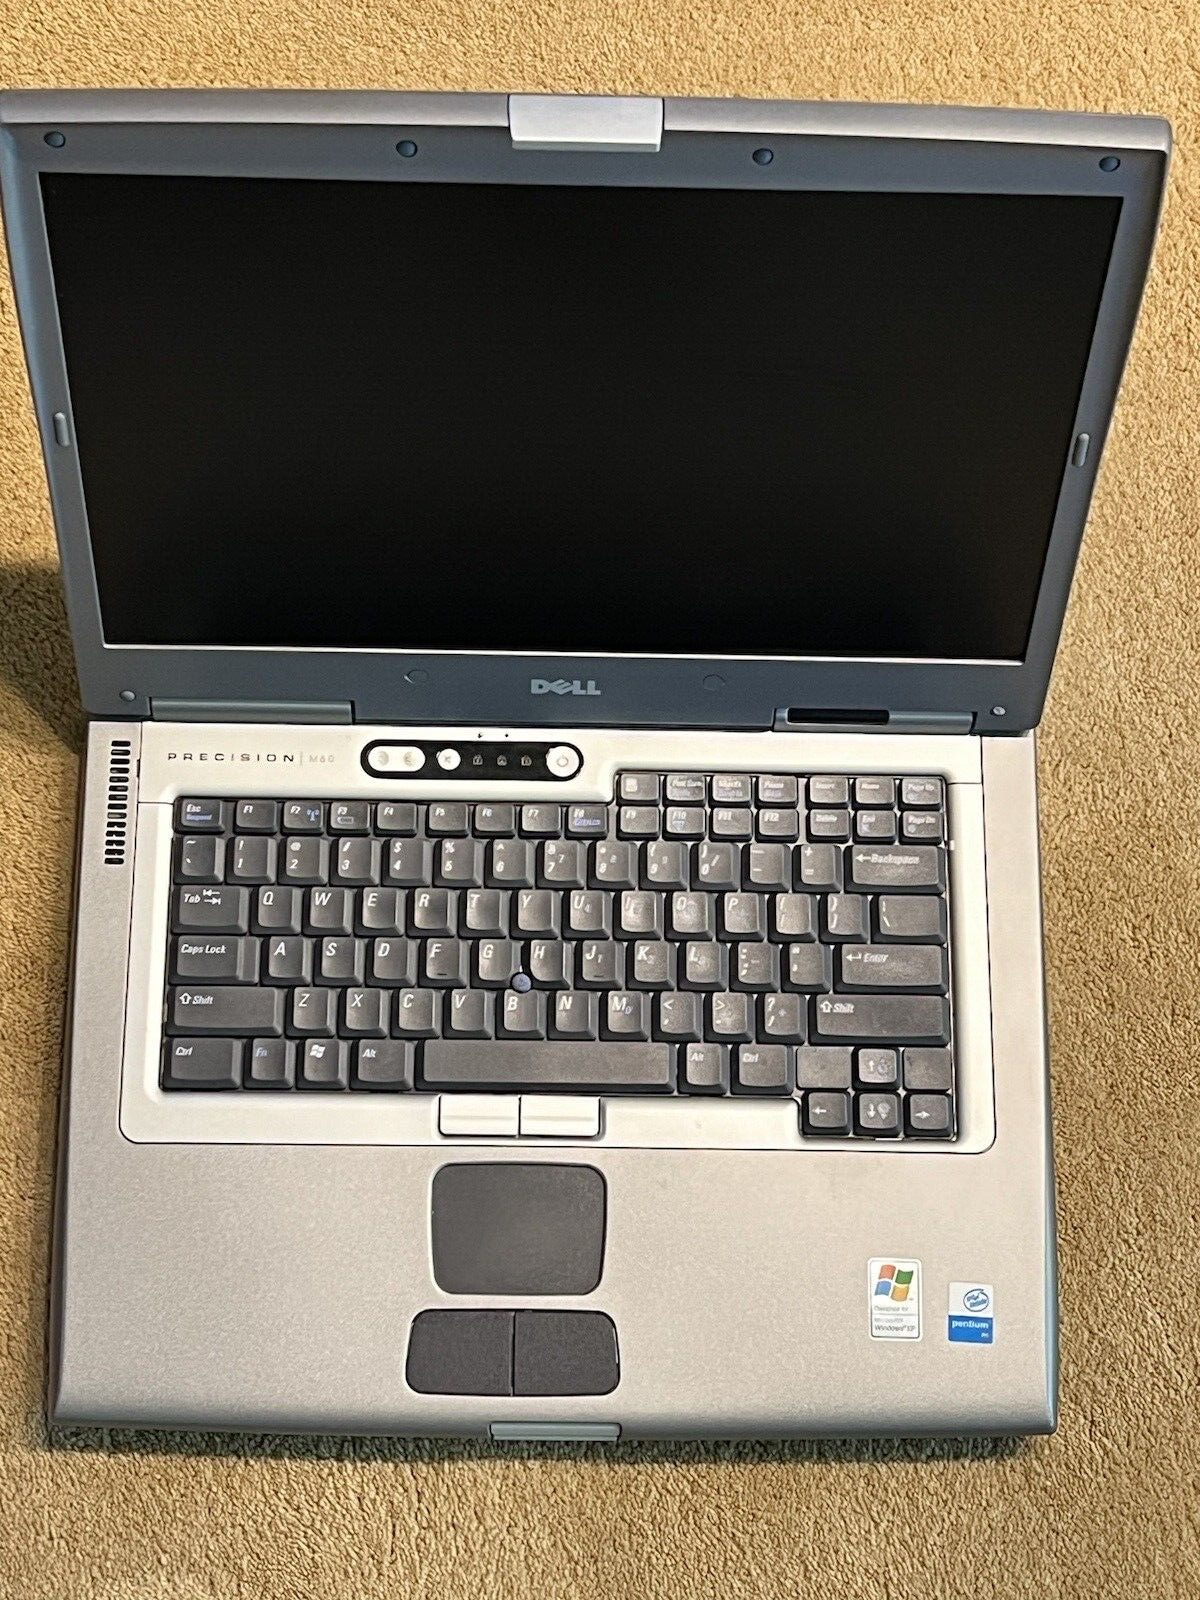 Vintage Dell Precision M60 Laptop, includes battery, charger, hard drive, CD/DVD